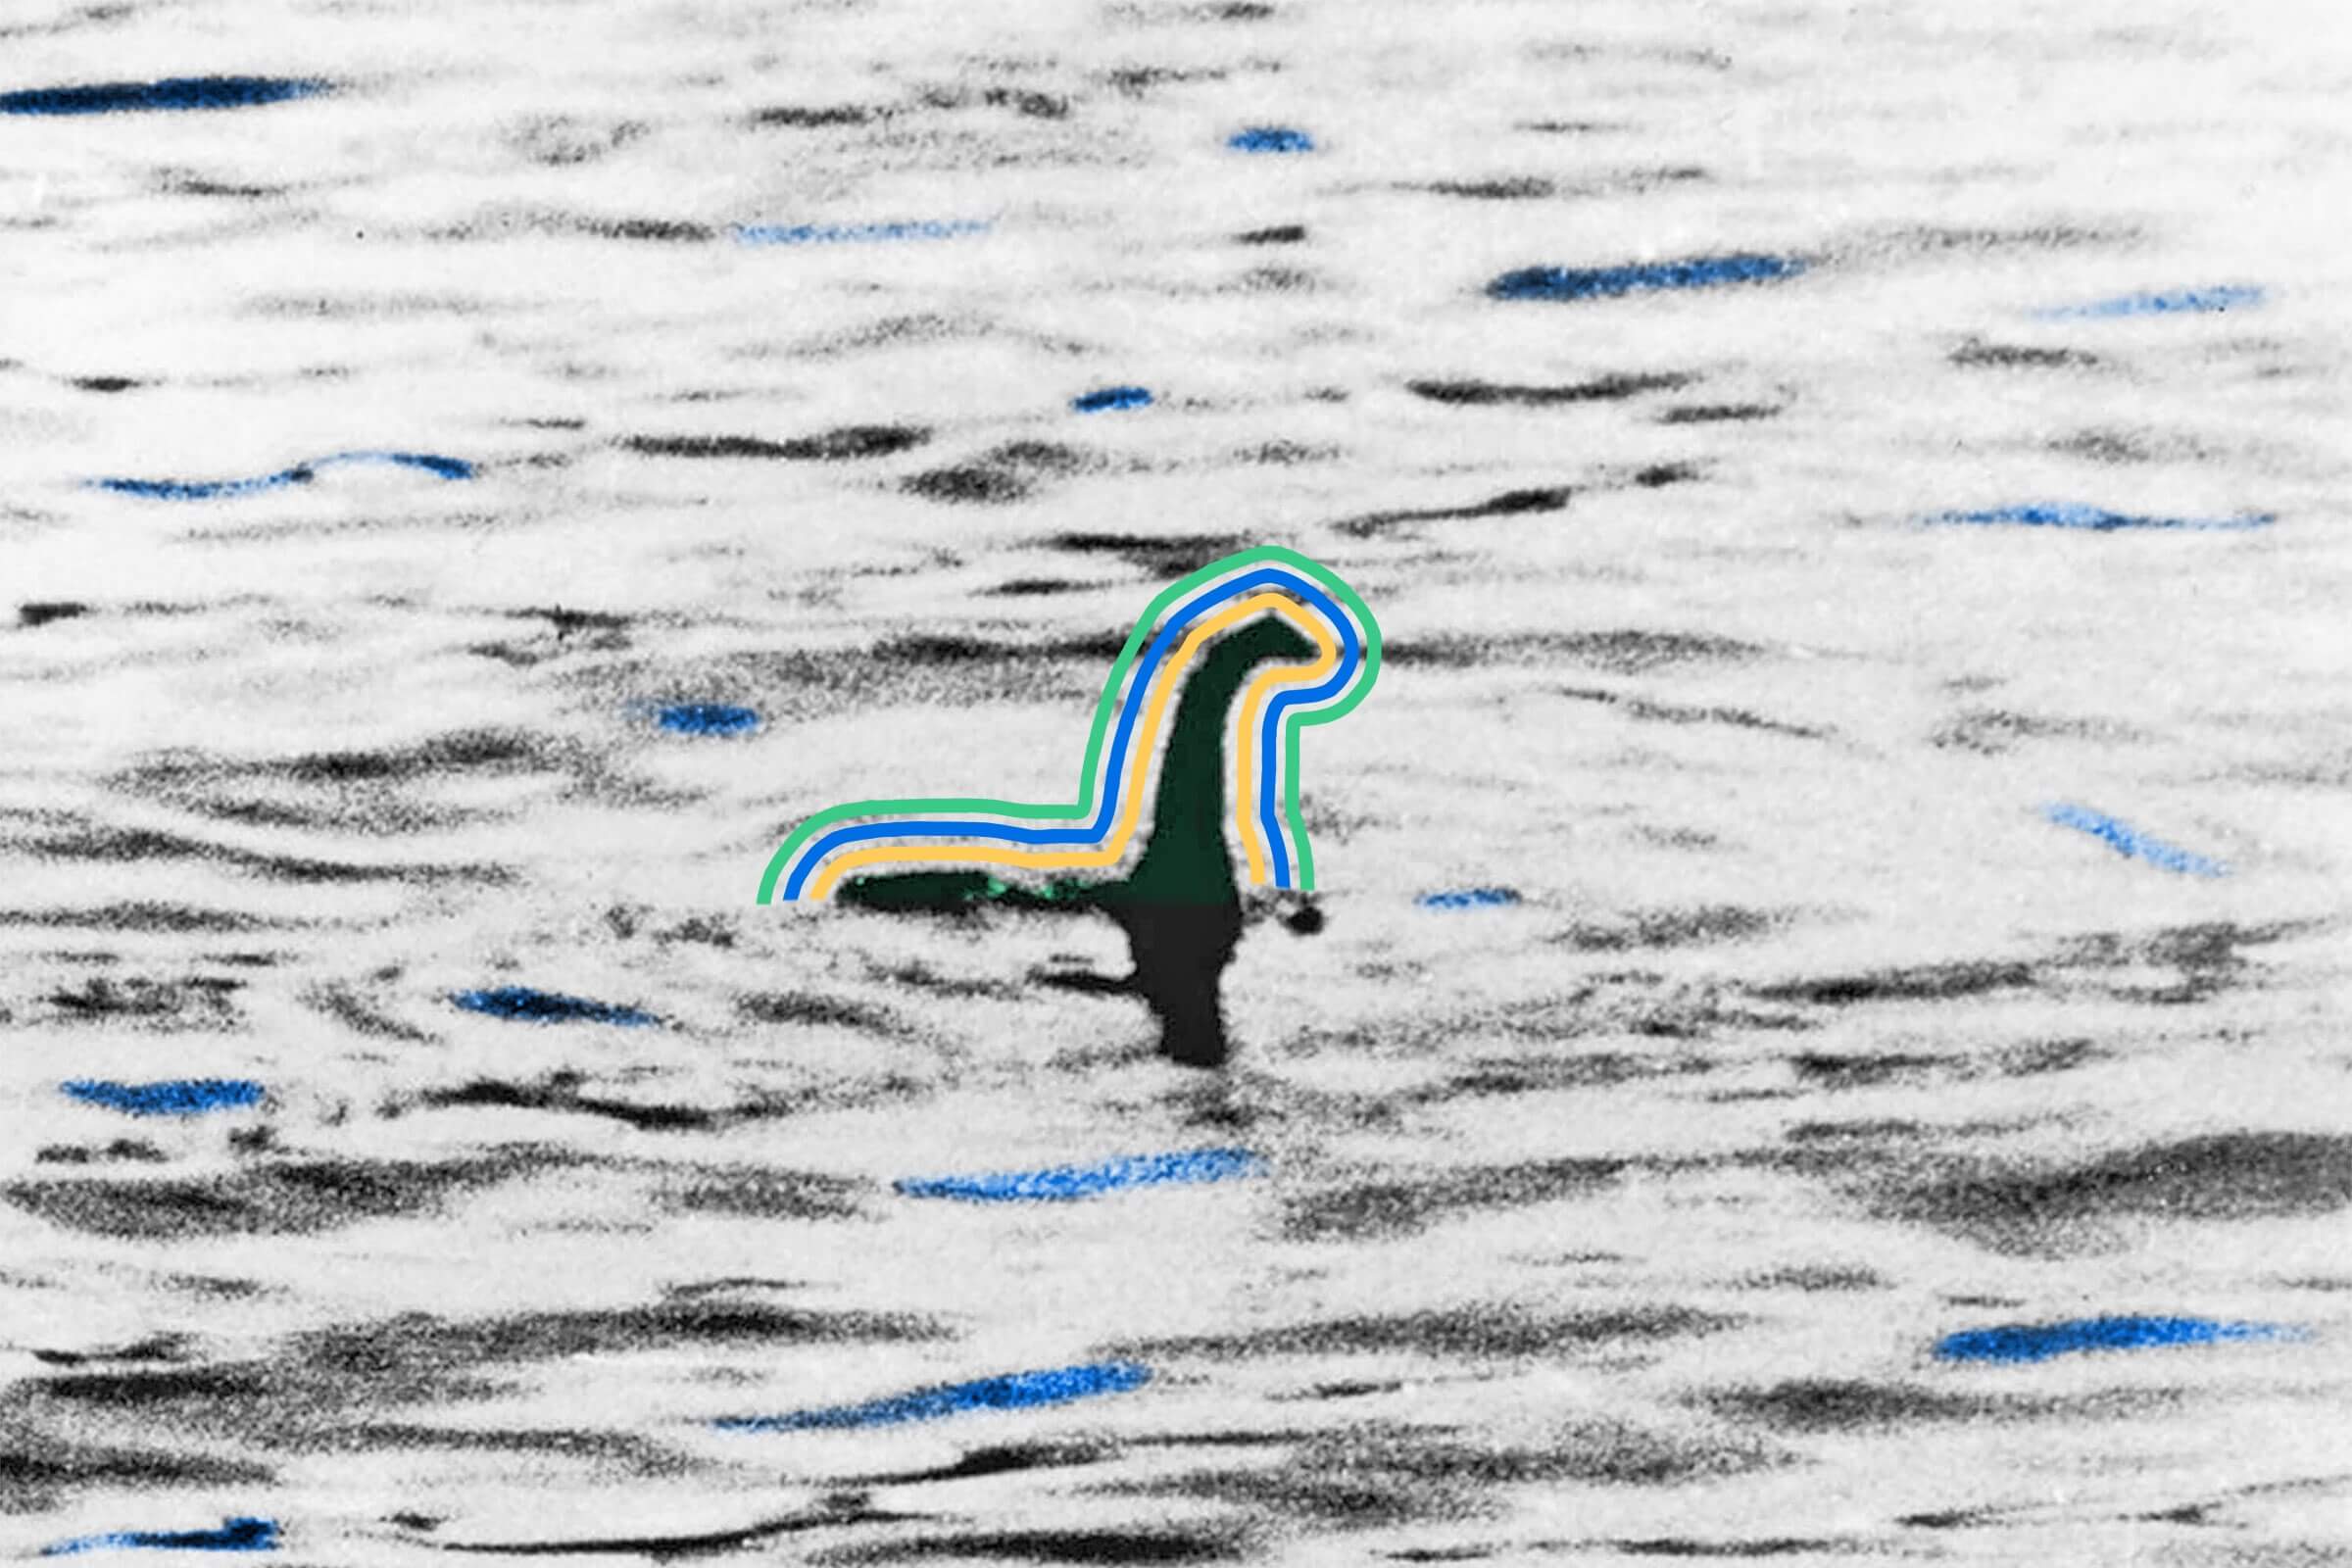 The Loch Ness monster has a scientific name.